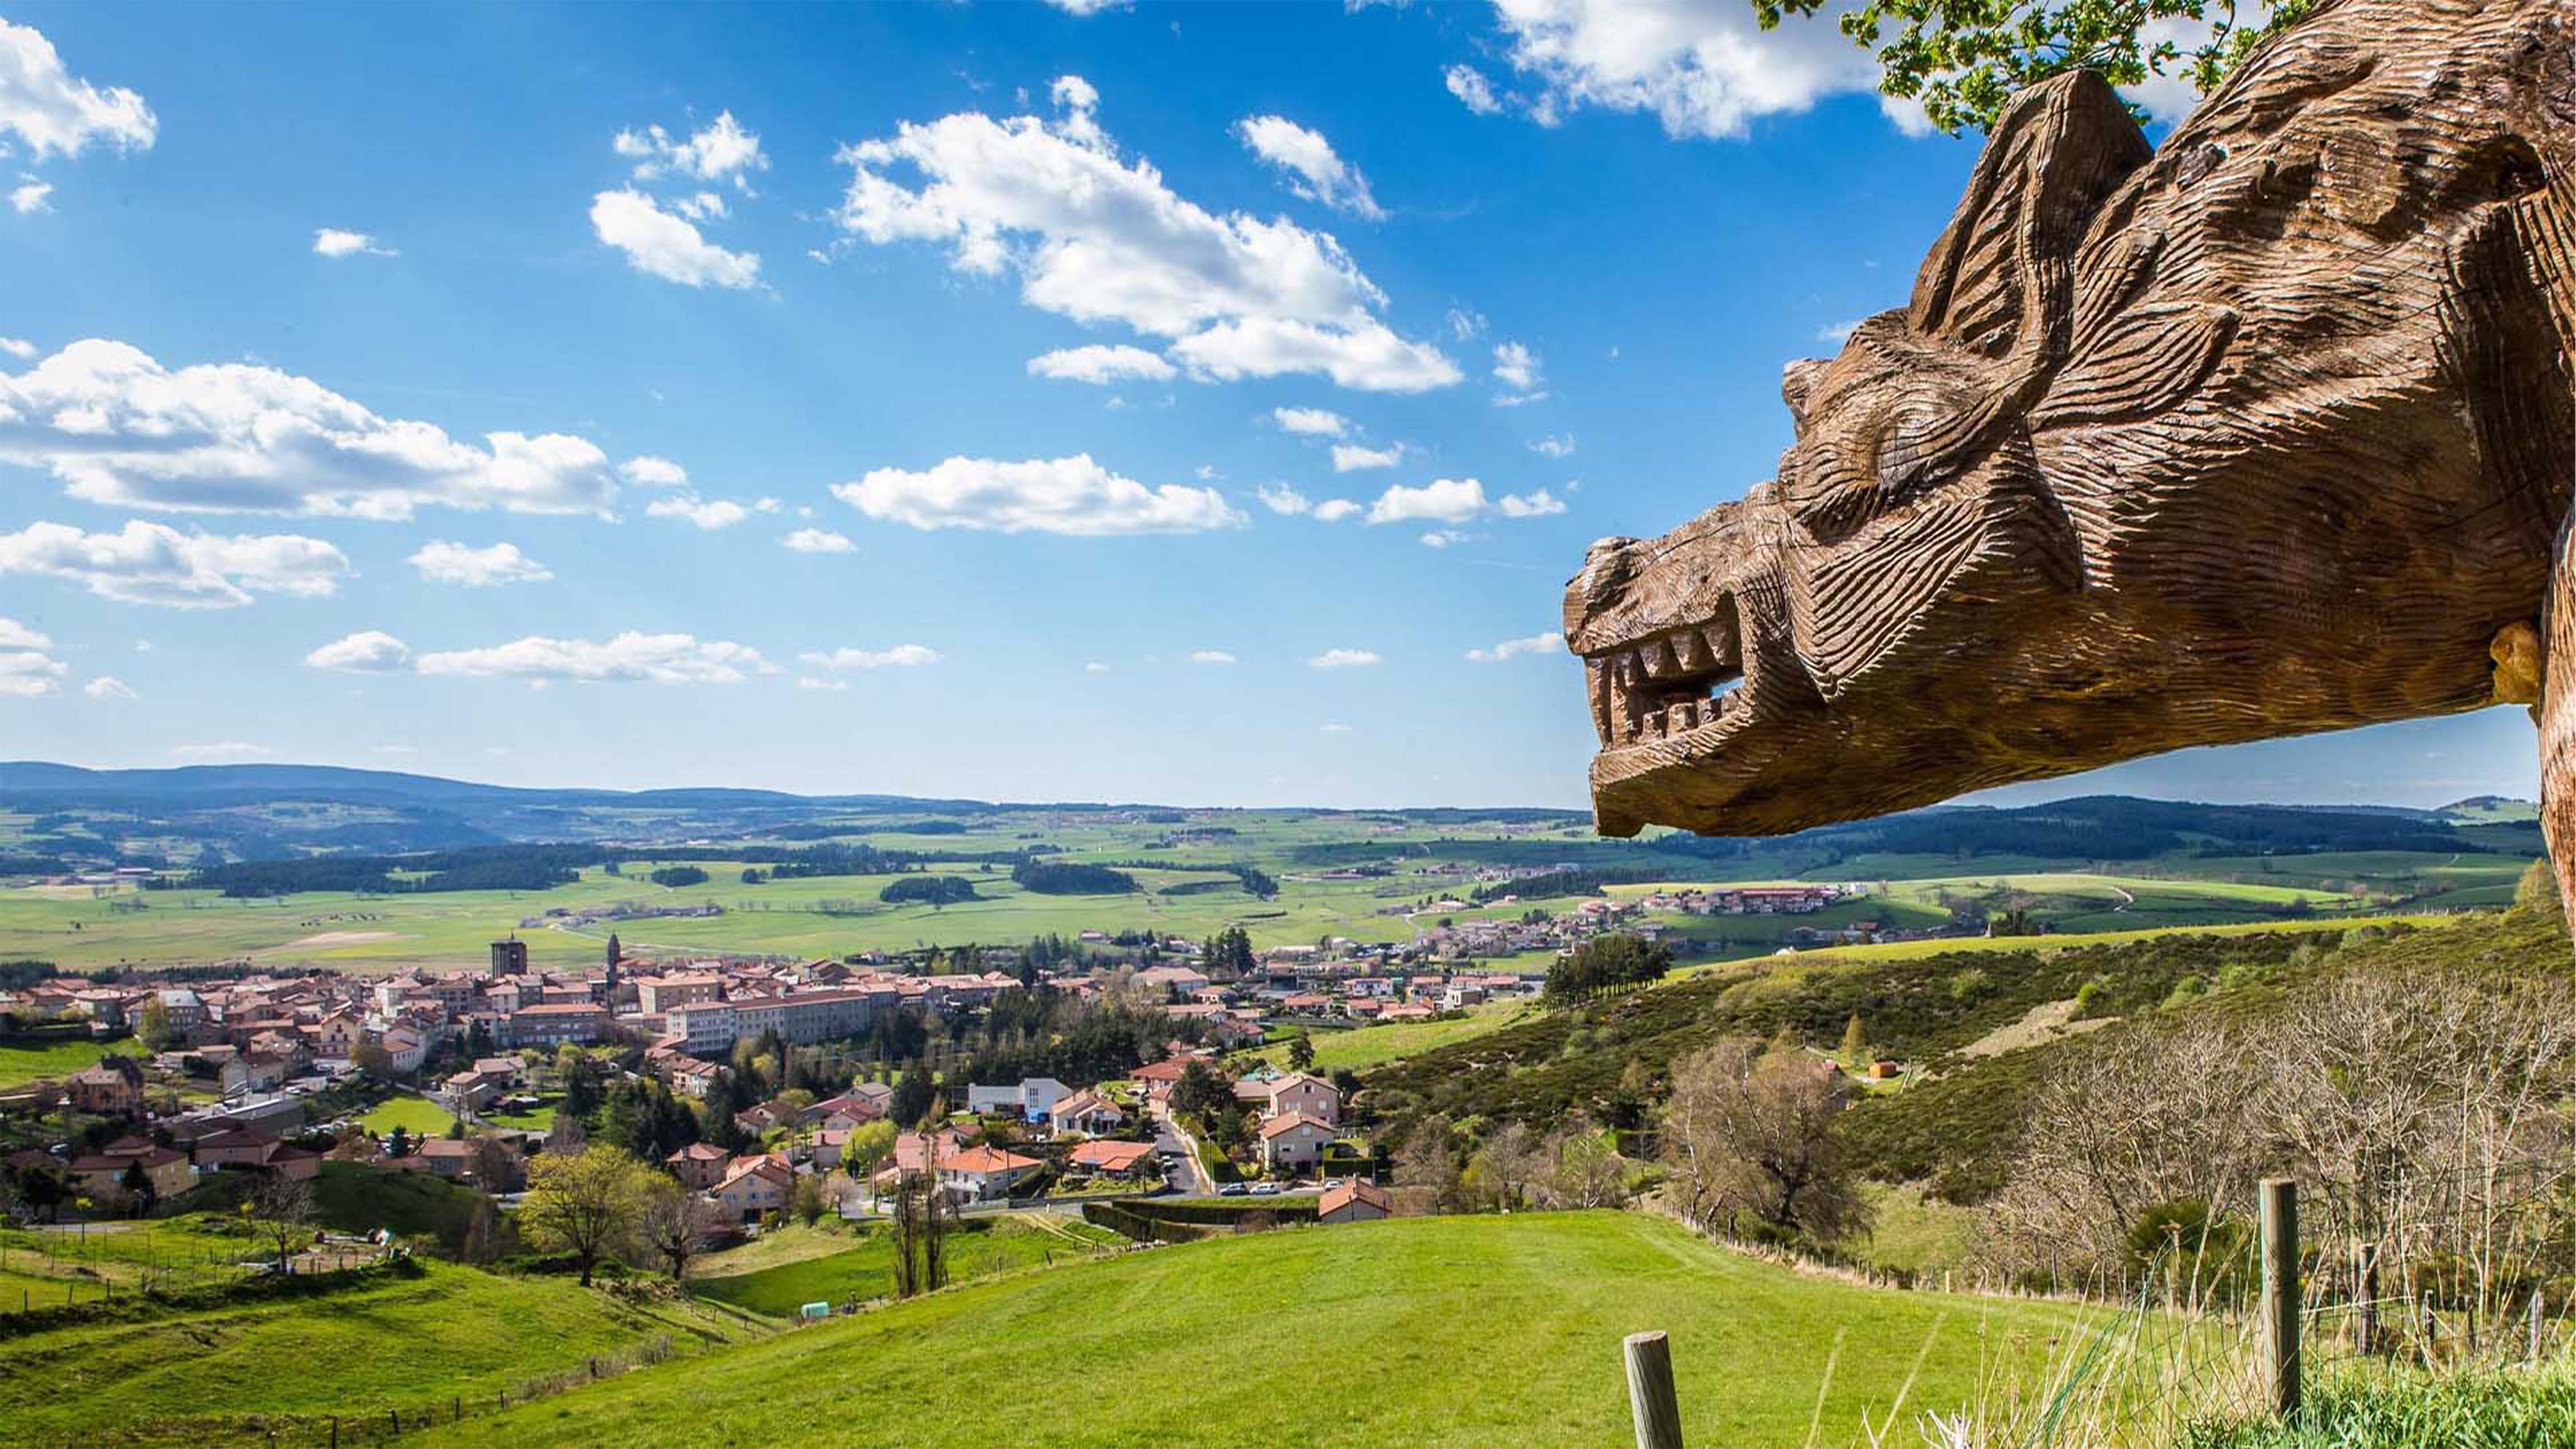 Saugues and its wooden sculpture of the Beast of Gévaudan, Haute-Loire, France by Gautier Stephane